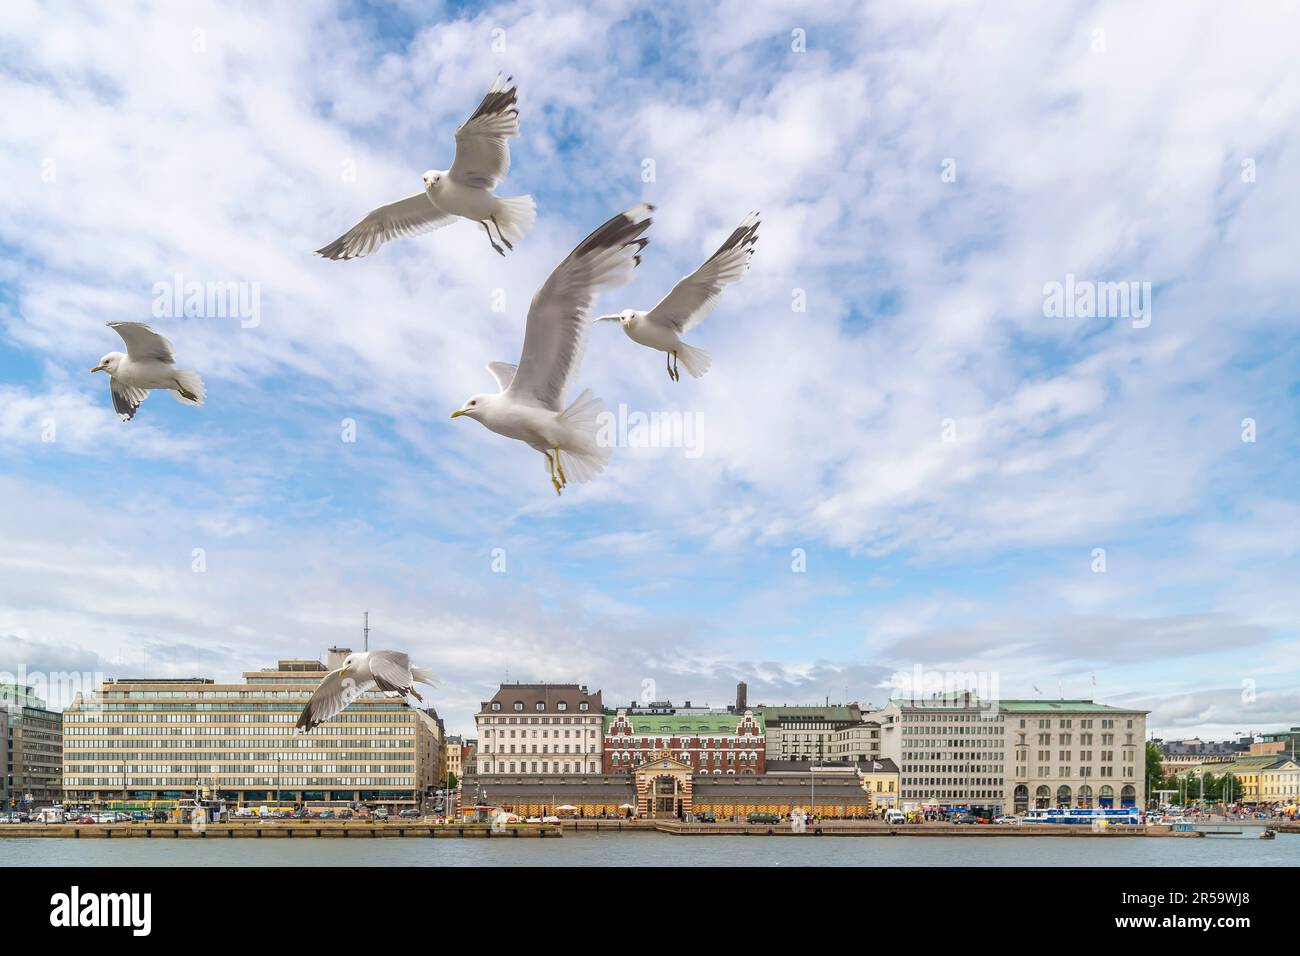 A group of seagulls on the blue sky of central Helsinki, Finland Stock Photo